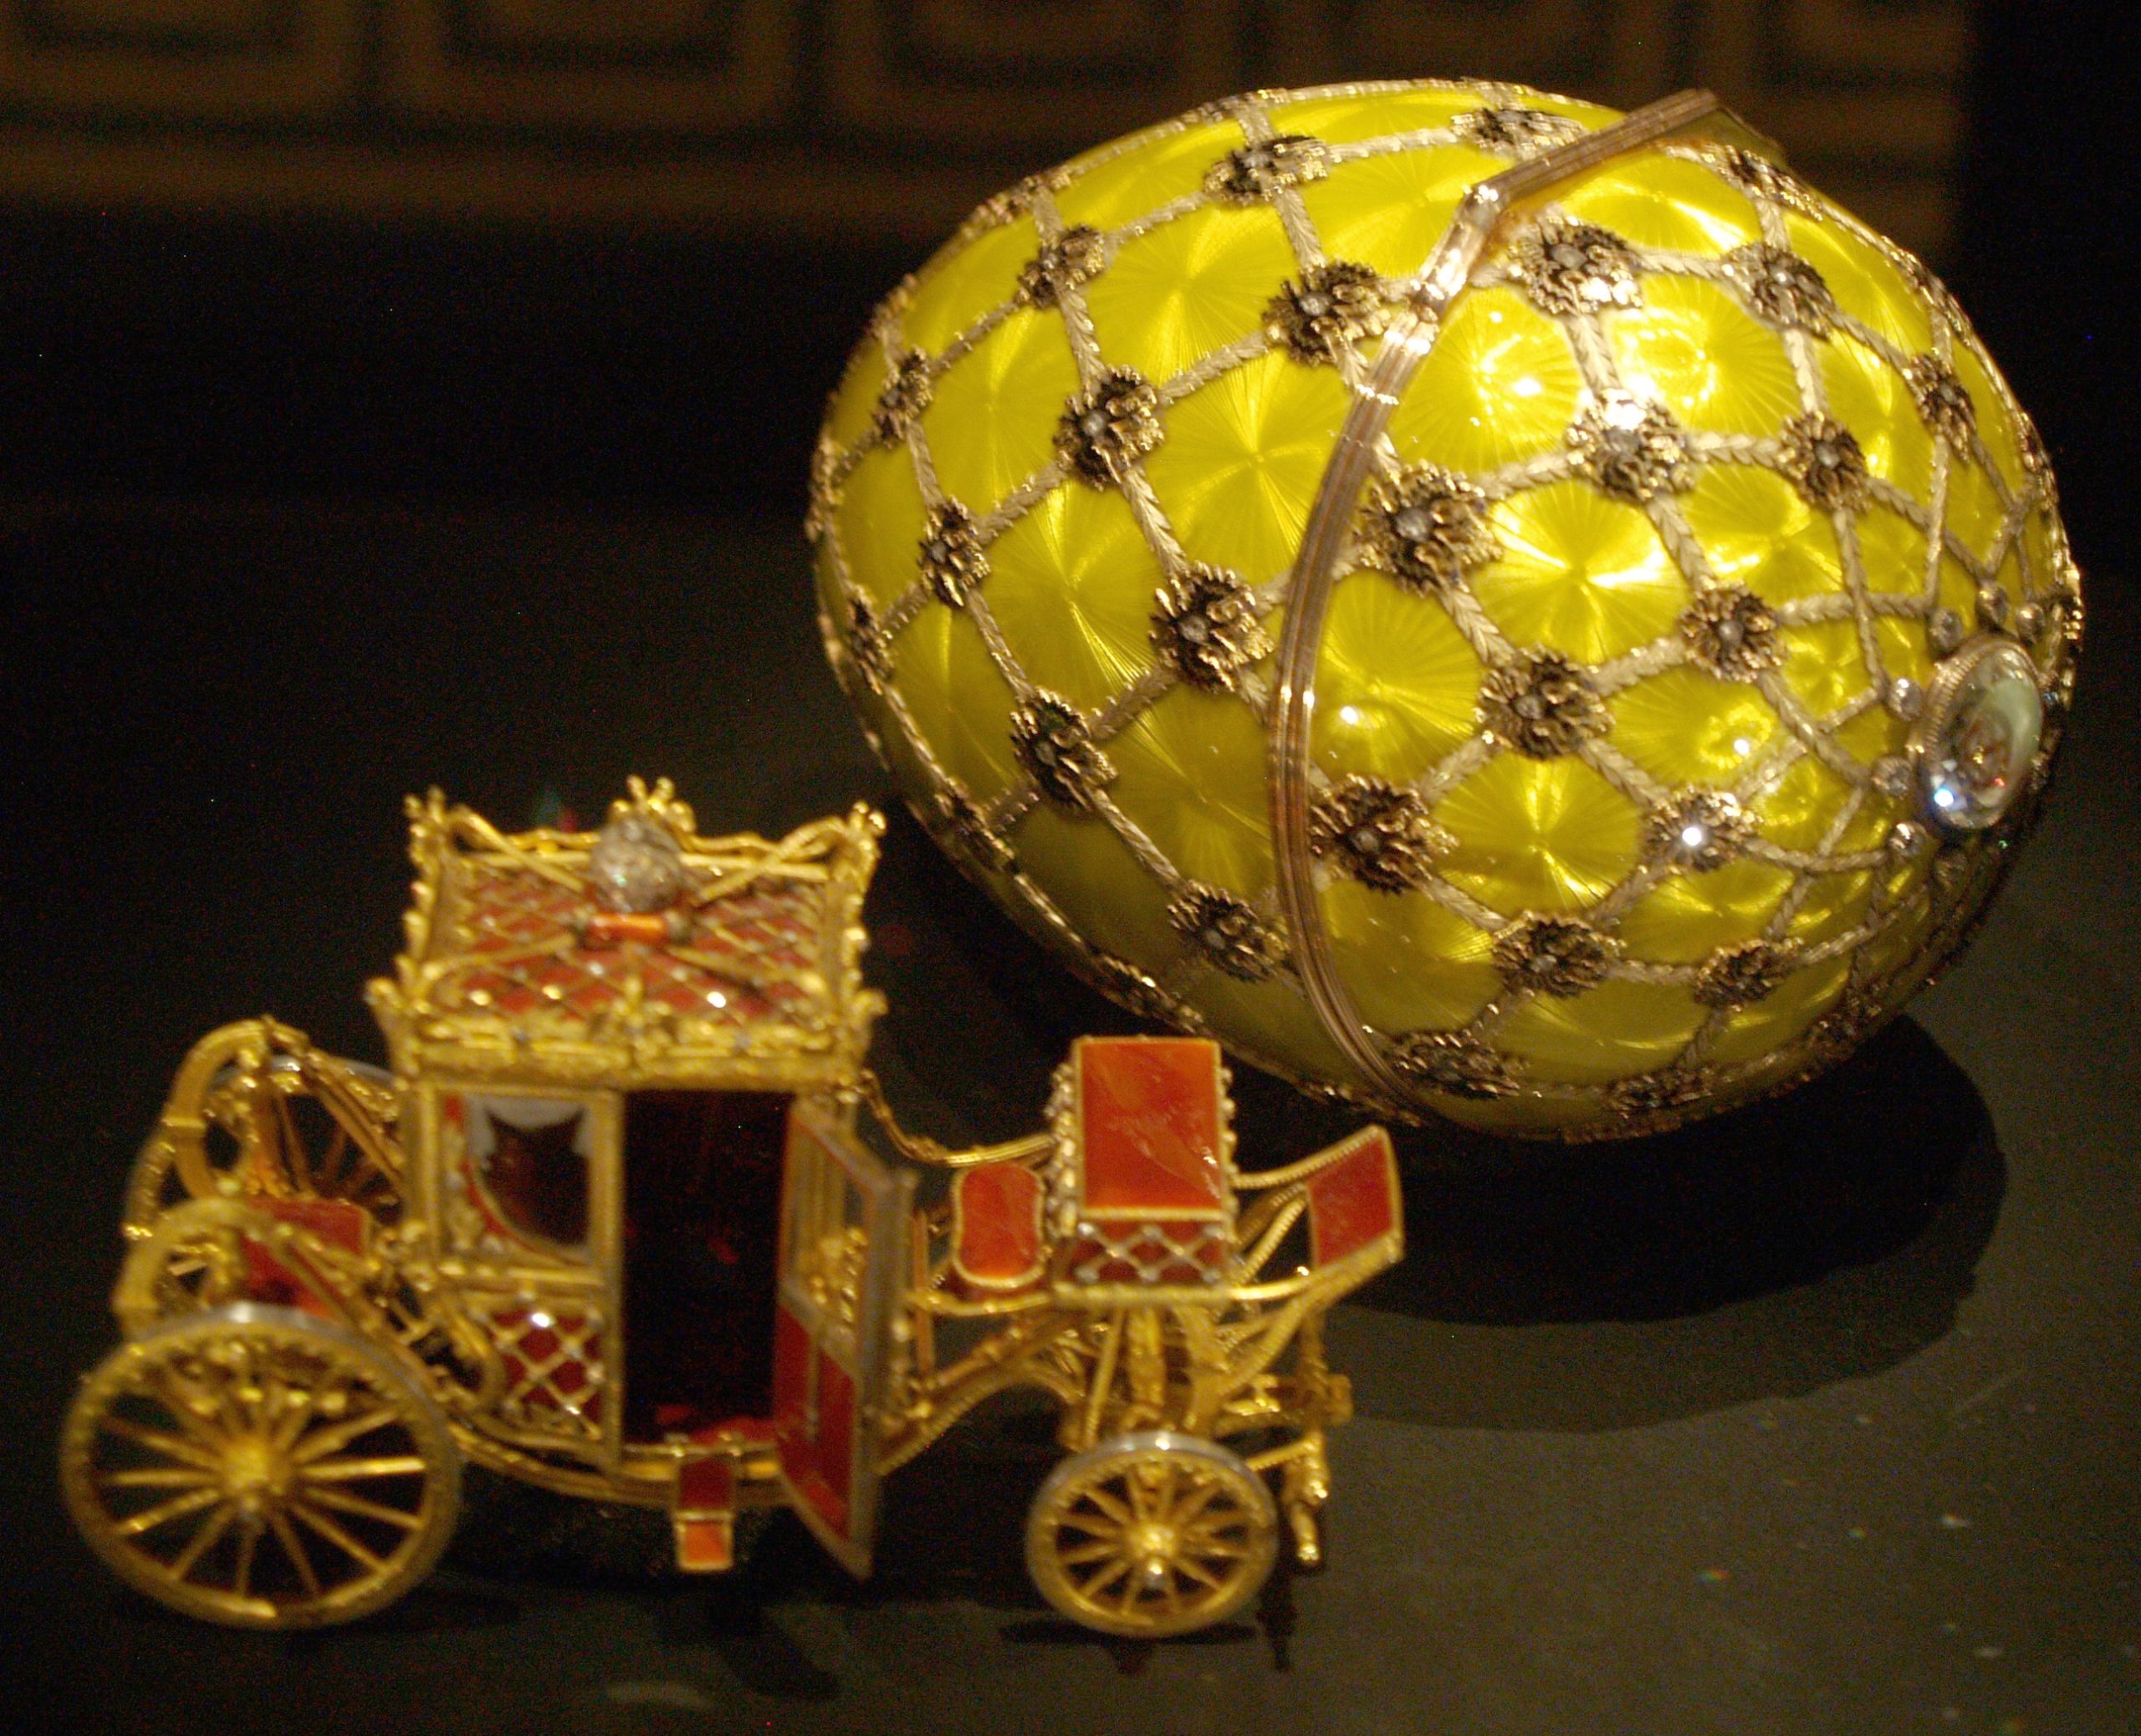 The Imperial Coronation egg, one of the most famous and iconic of all the Fabergé eggs.